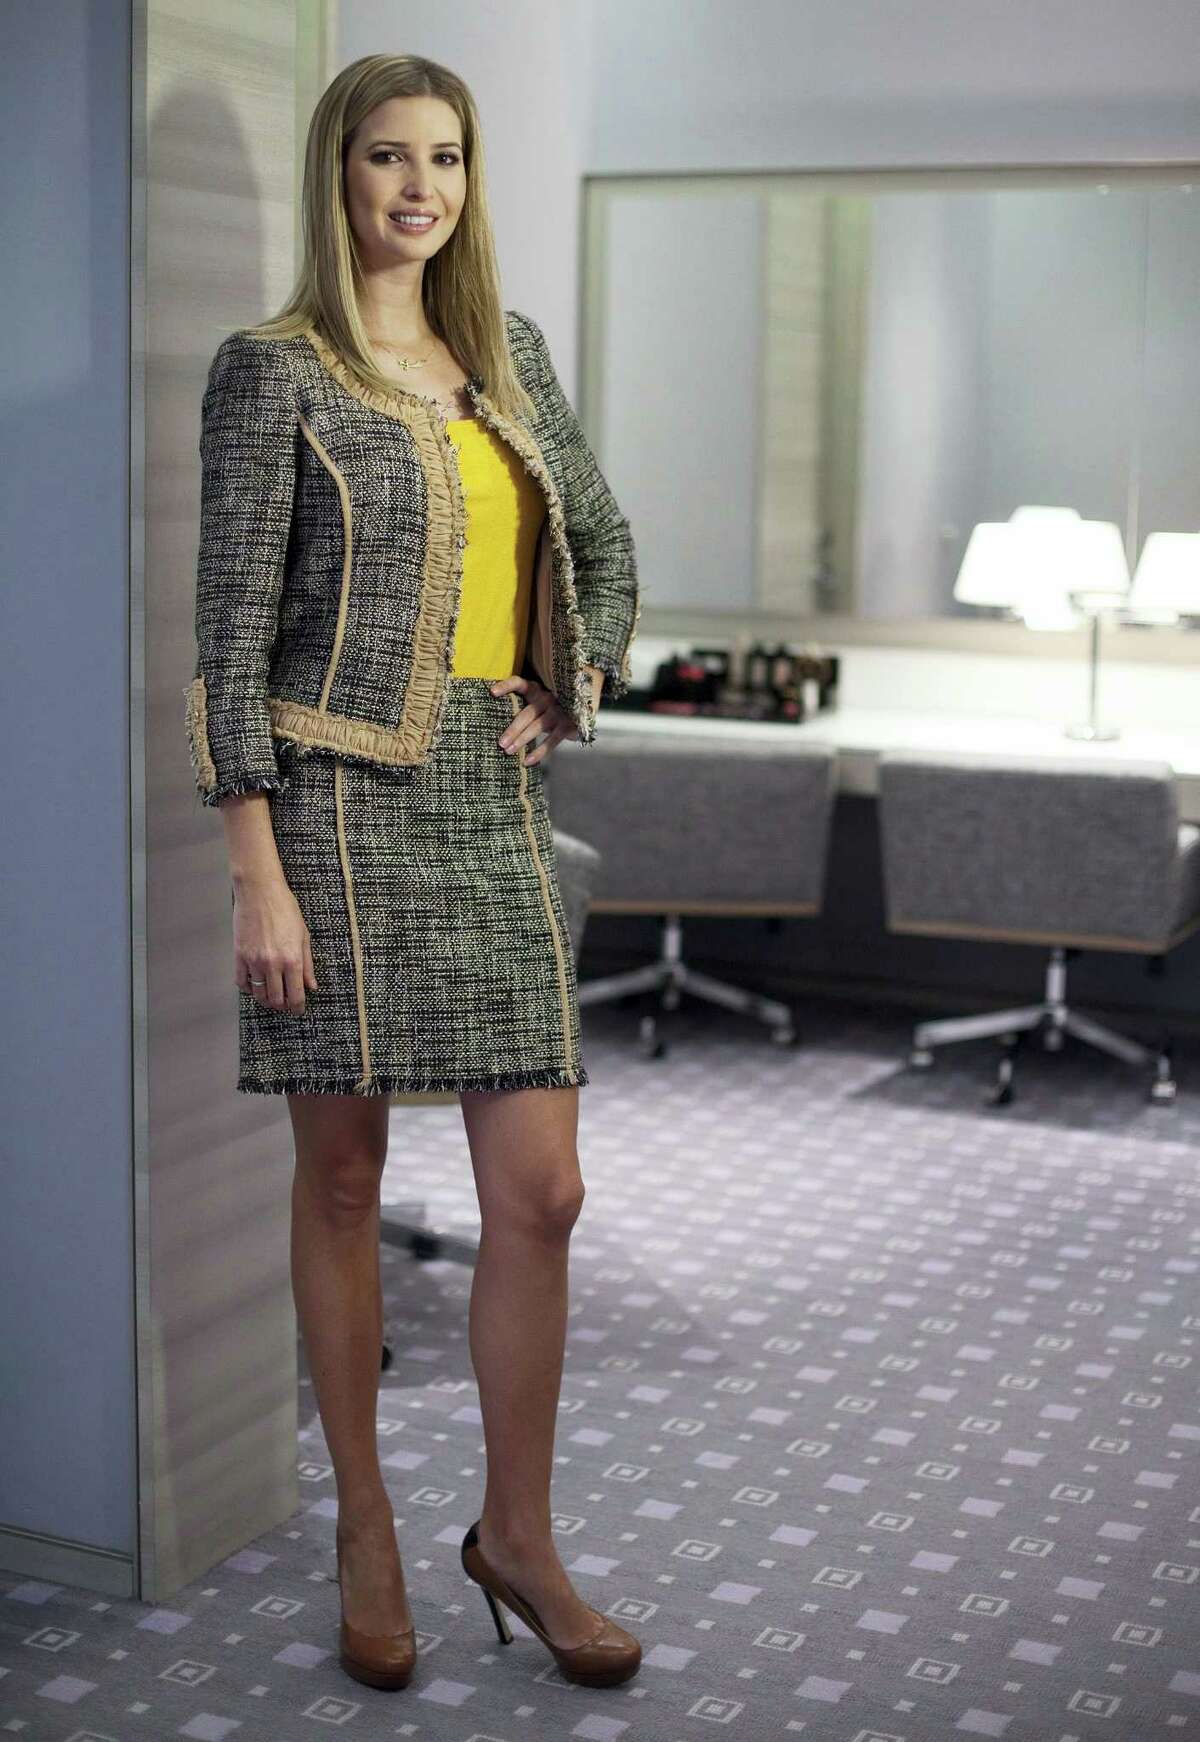 Ivanka Trump models an outfit following an interview to promote her clothing line in Toronto in 2015.